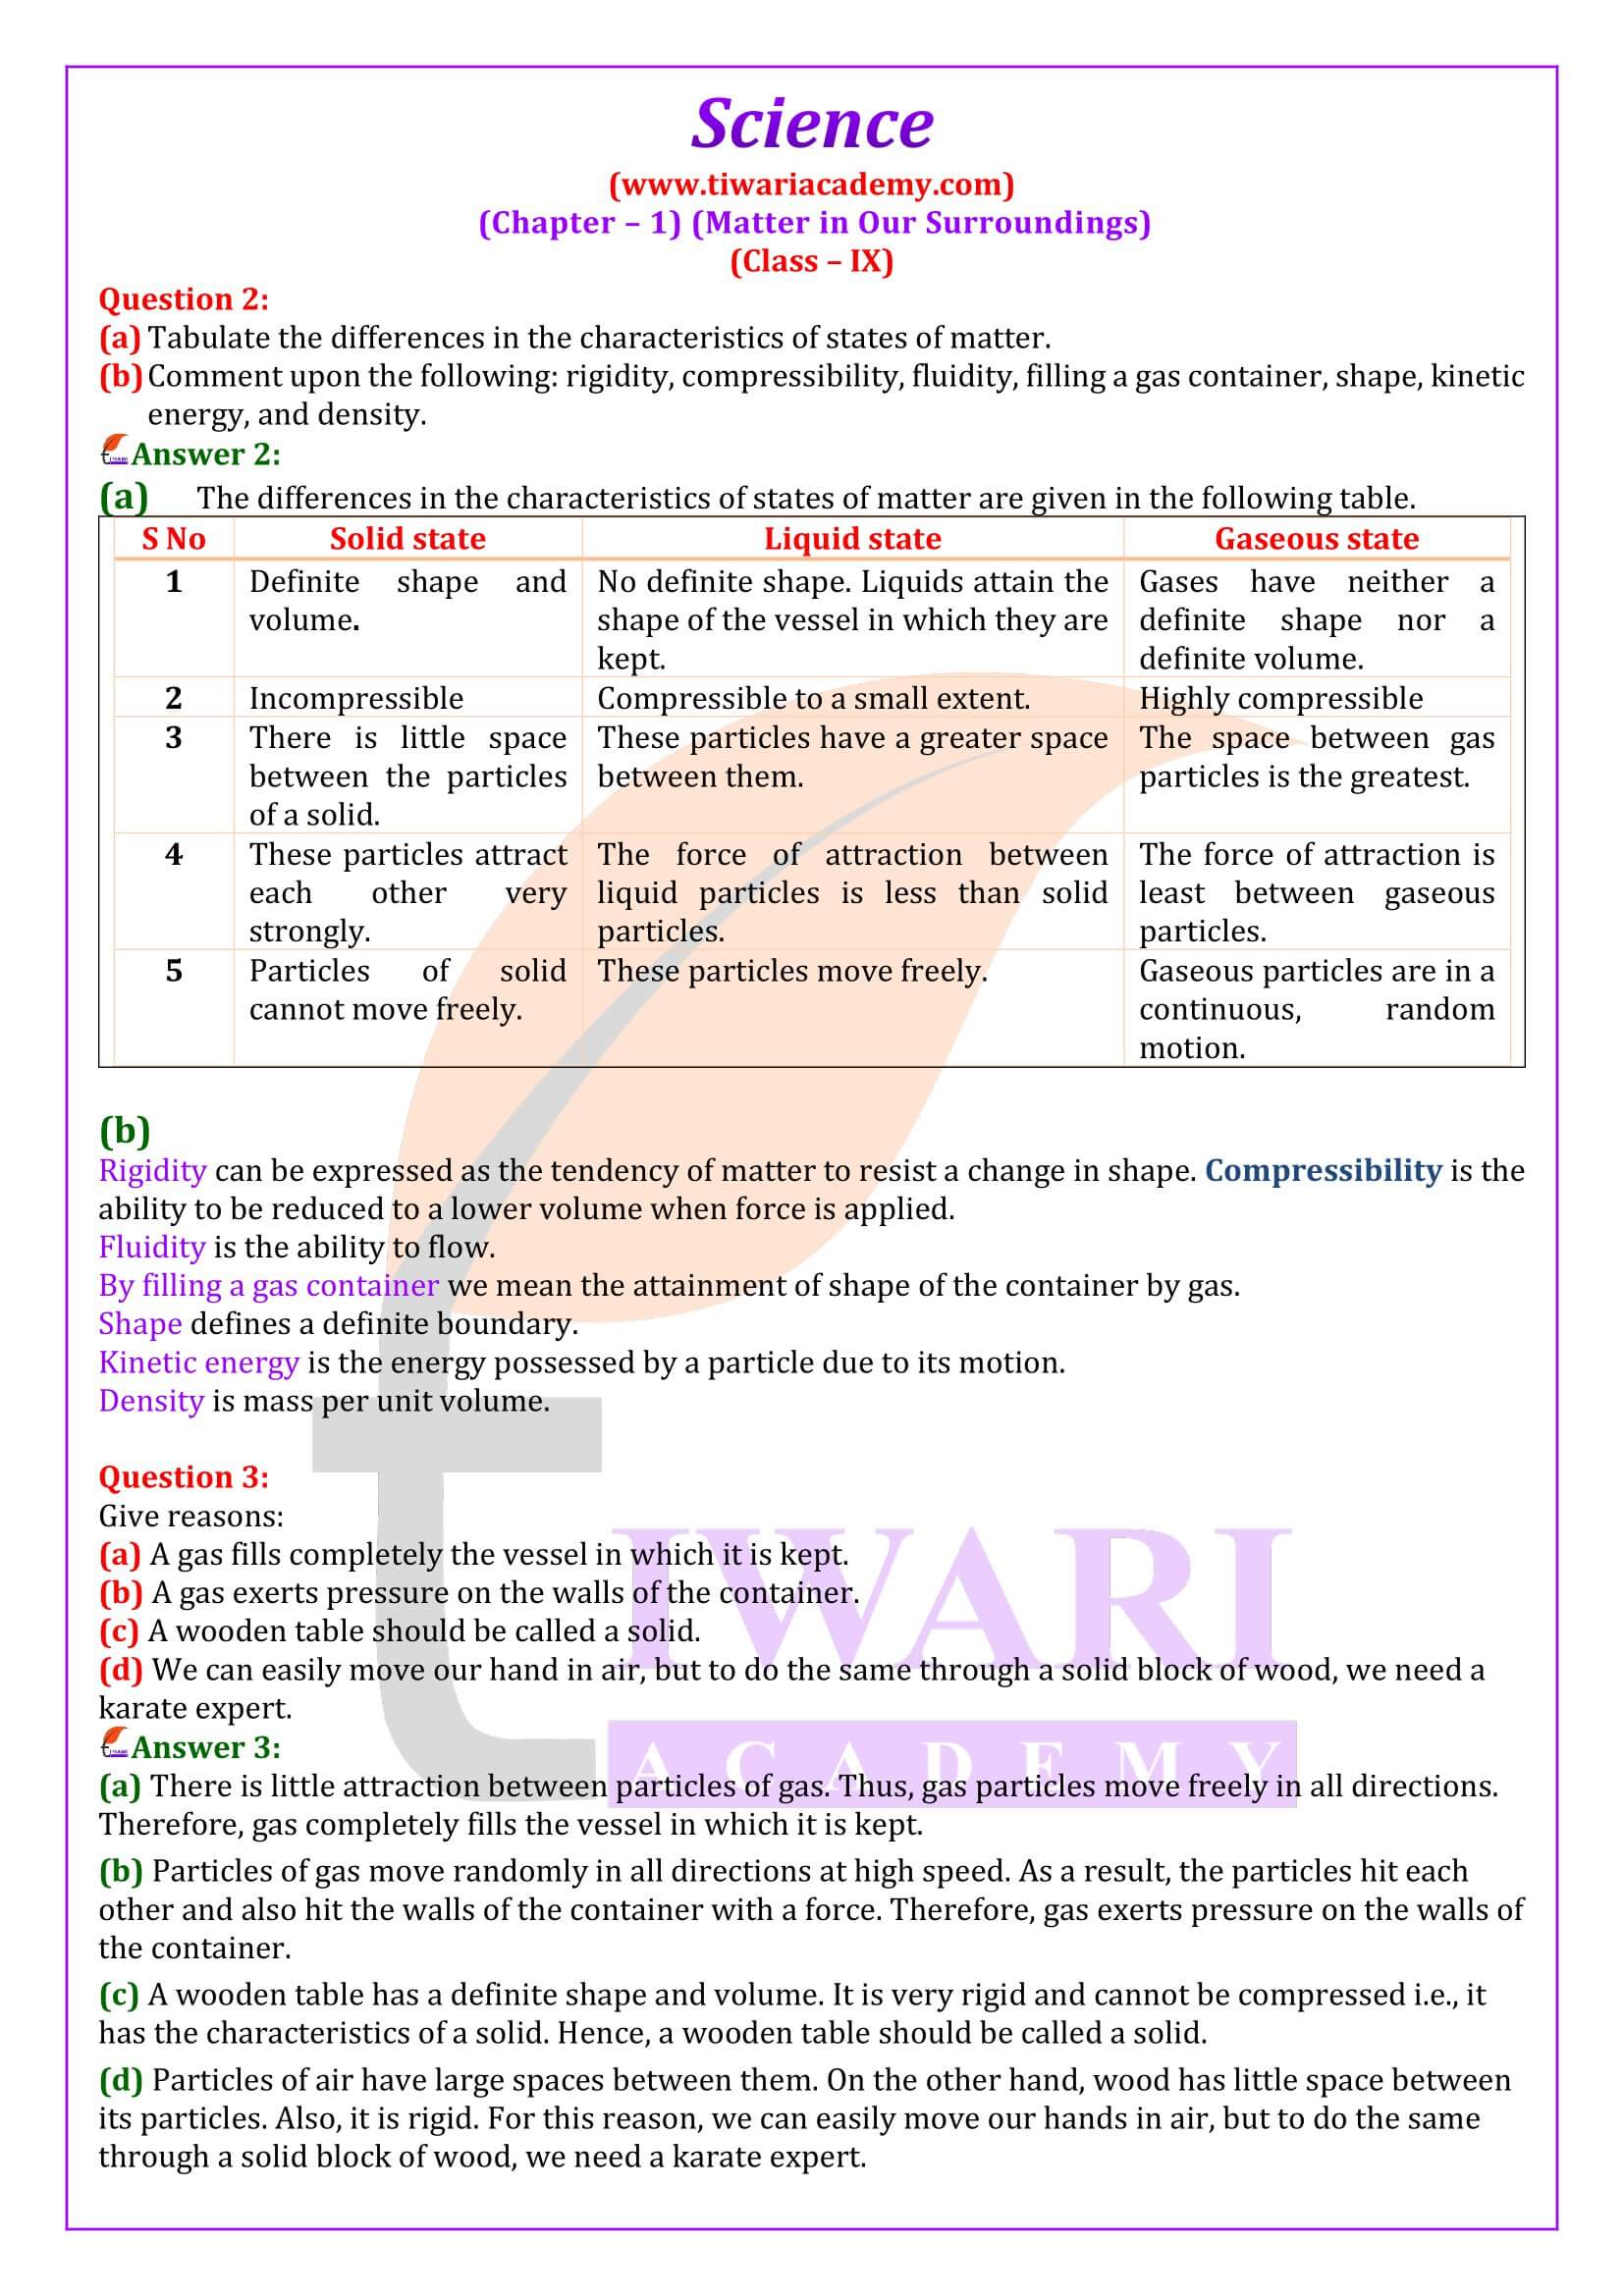 NCERT Solutions for Class 9 Science Chapter 1 Intext Questions